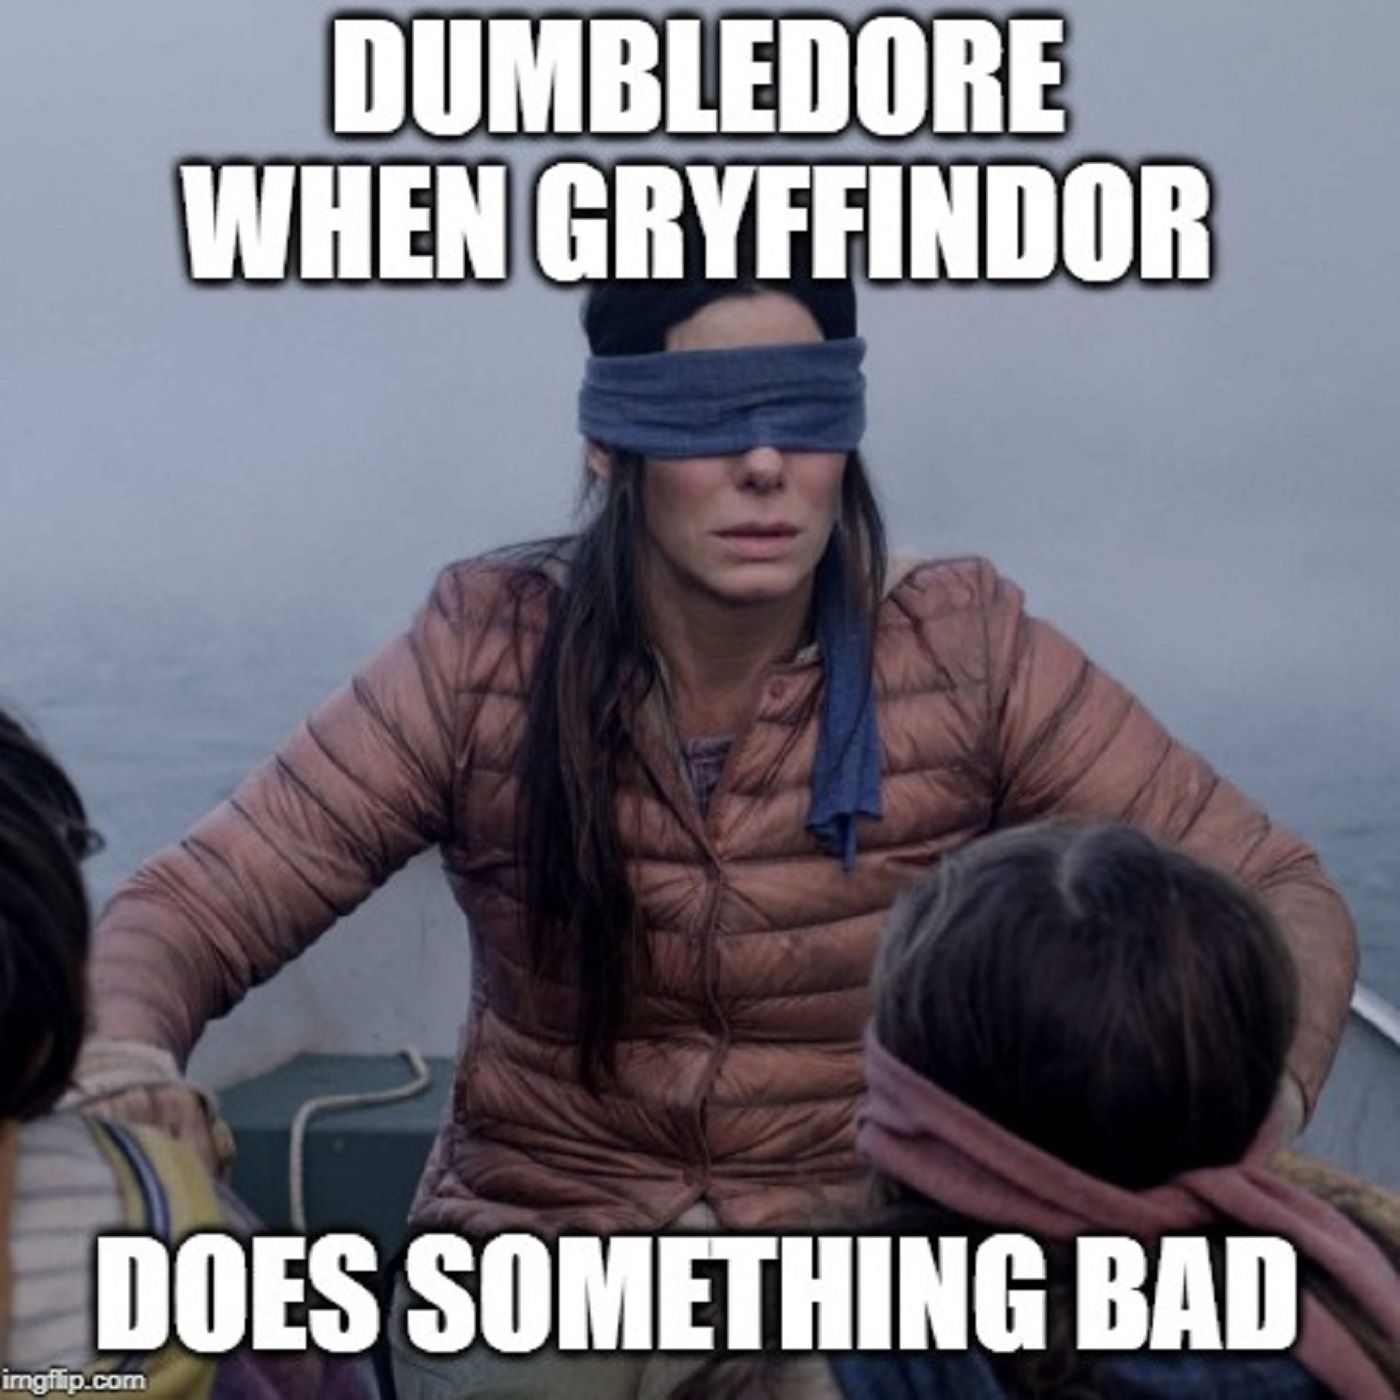 Harry Potter 10 Hilarious Gryffindor Logic Memes That Are Too Funny